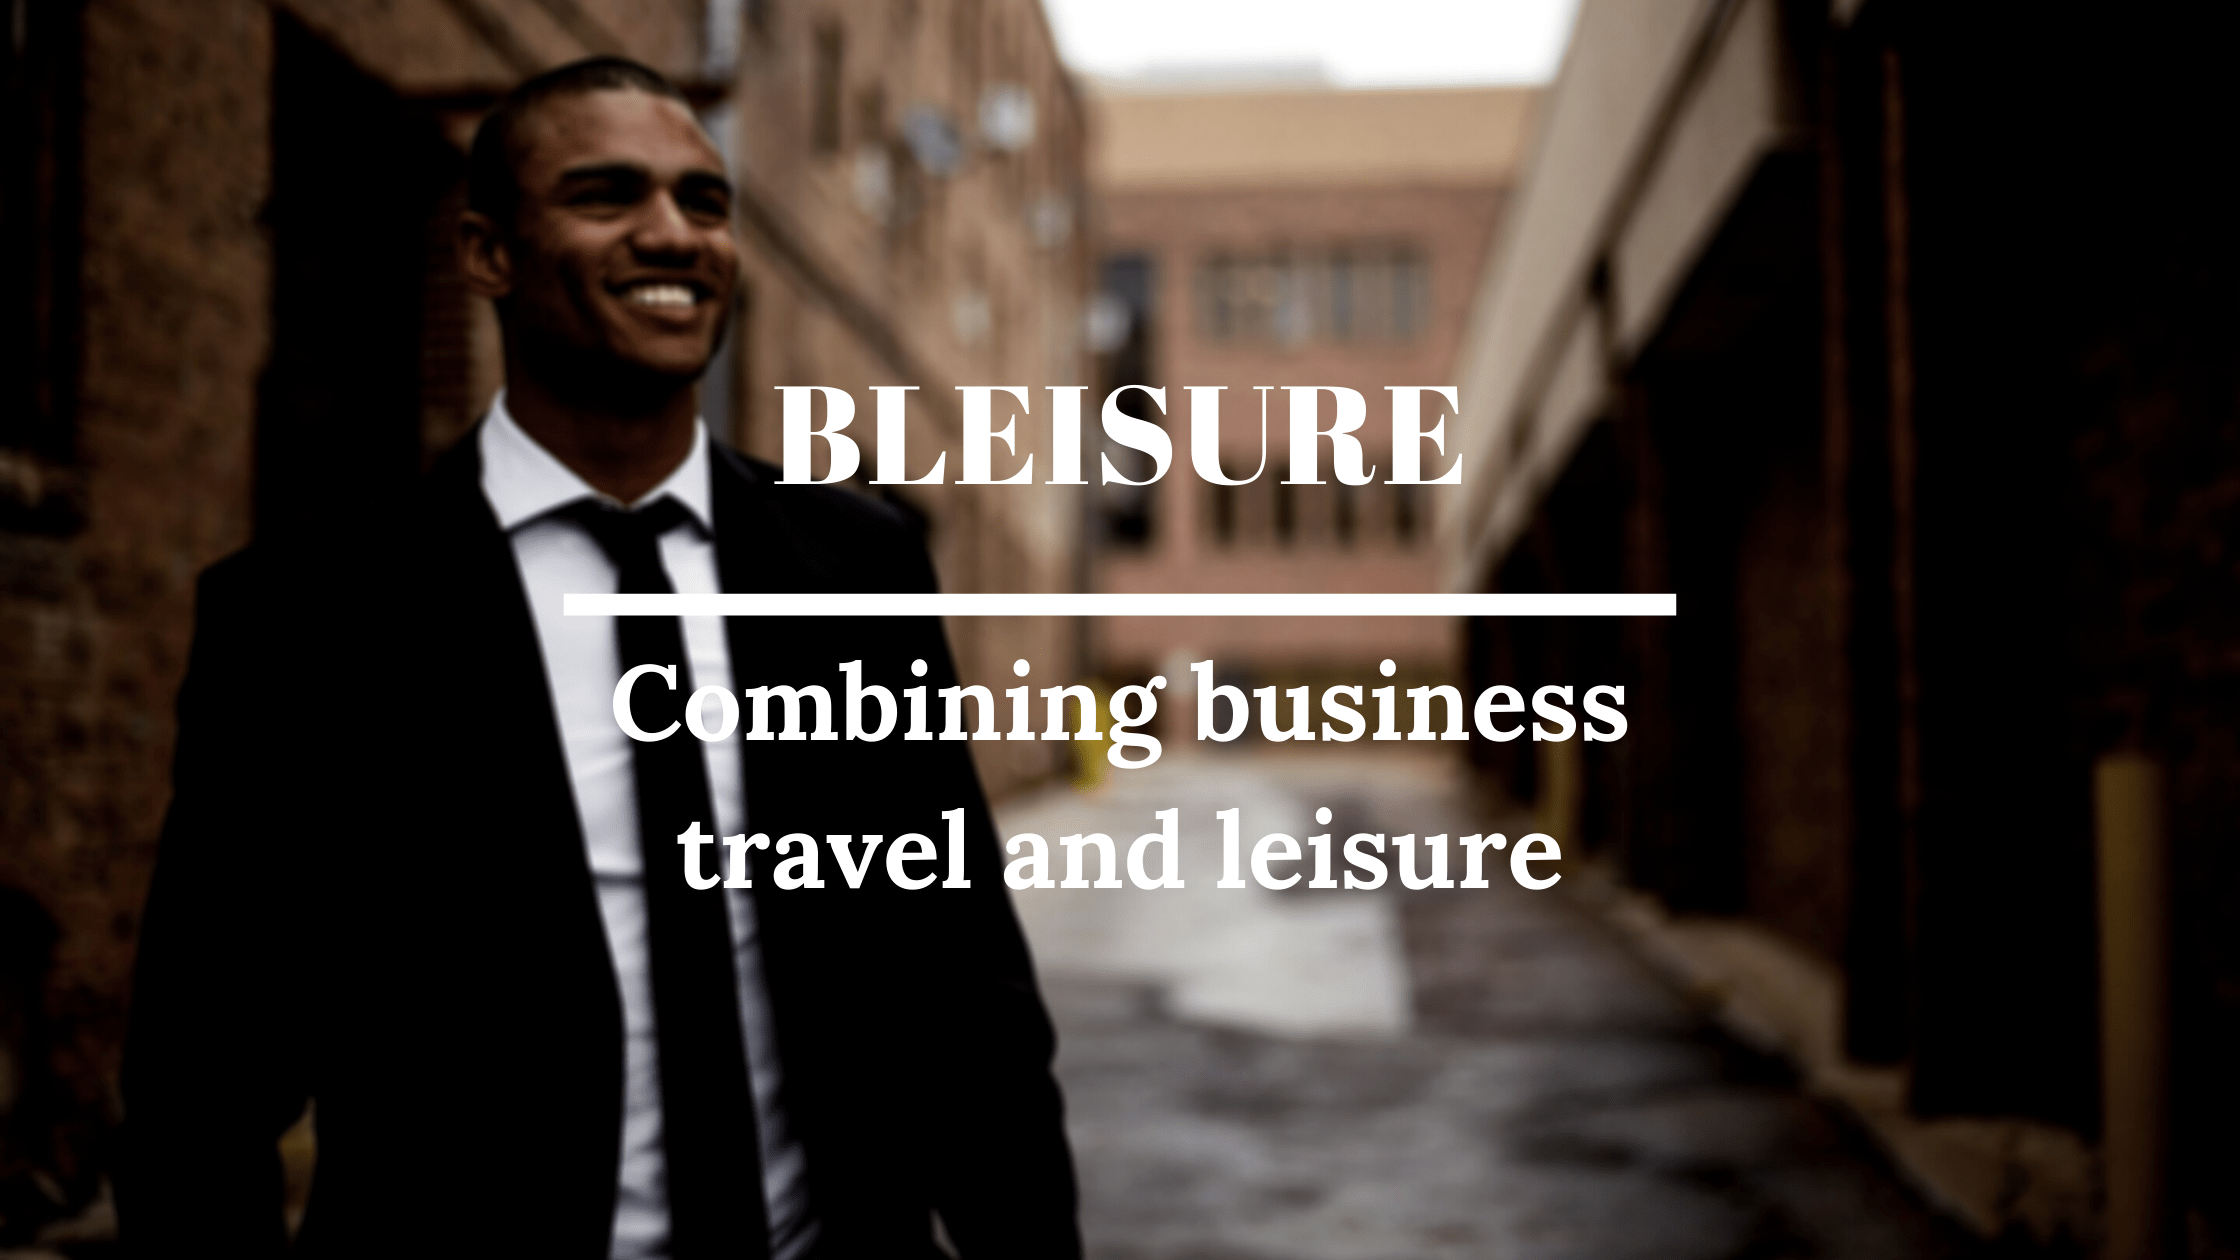 Bleisure or how to combine business travel and leisure?